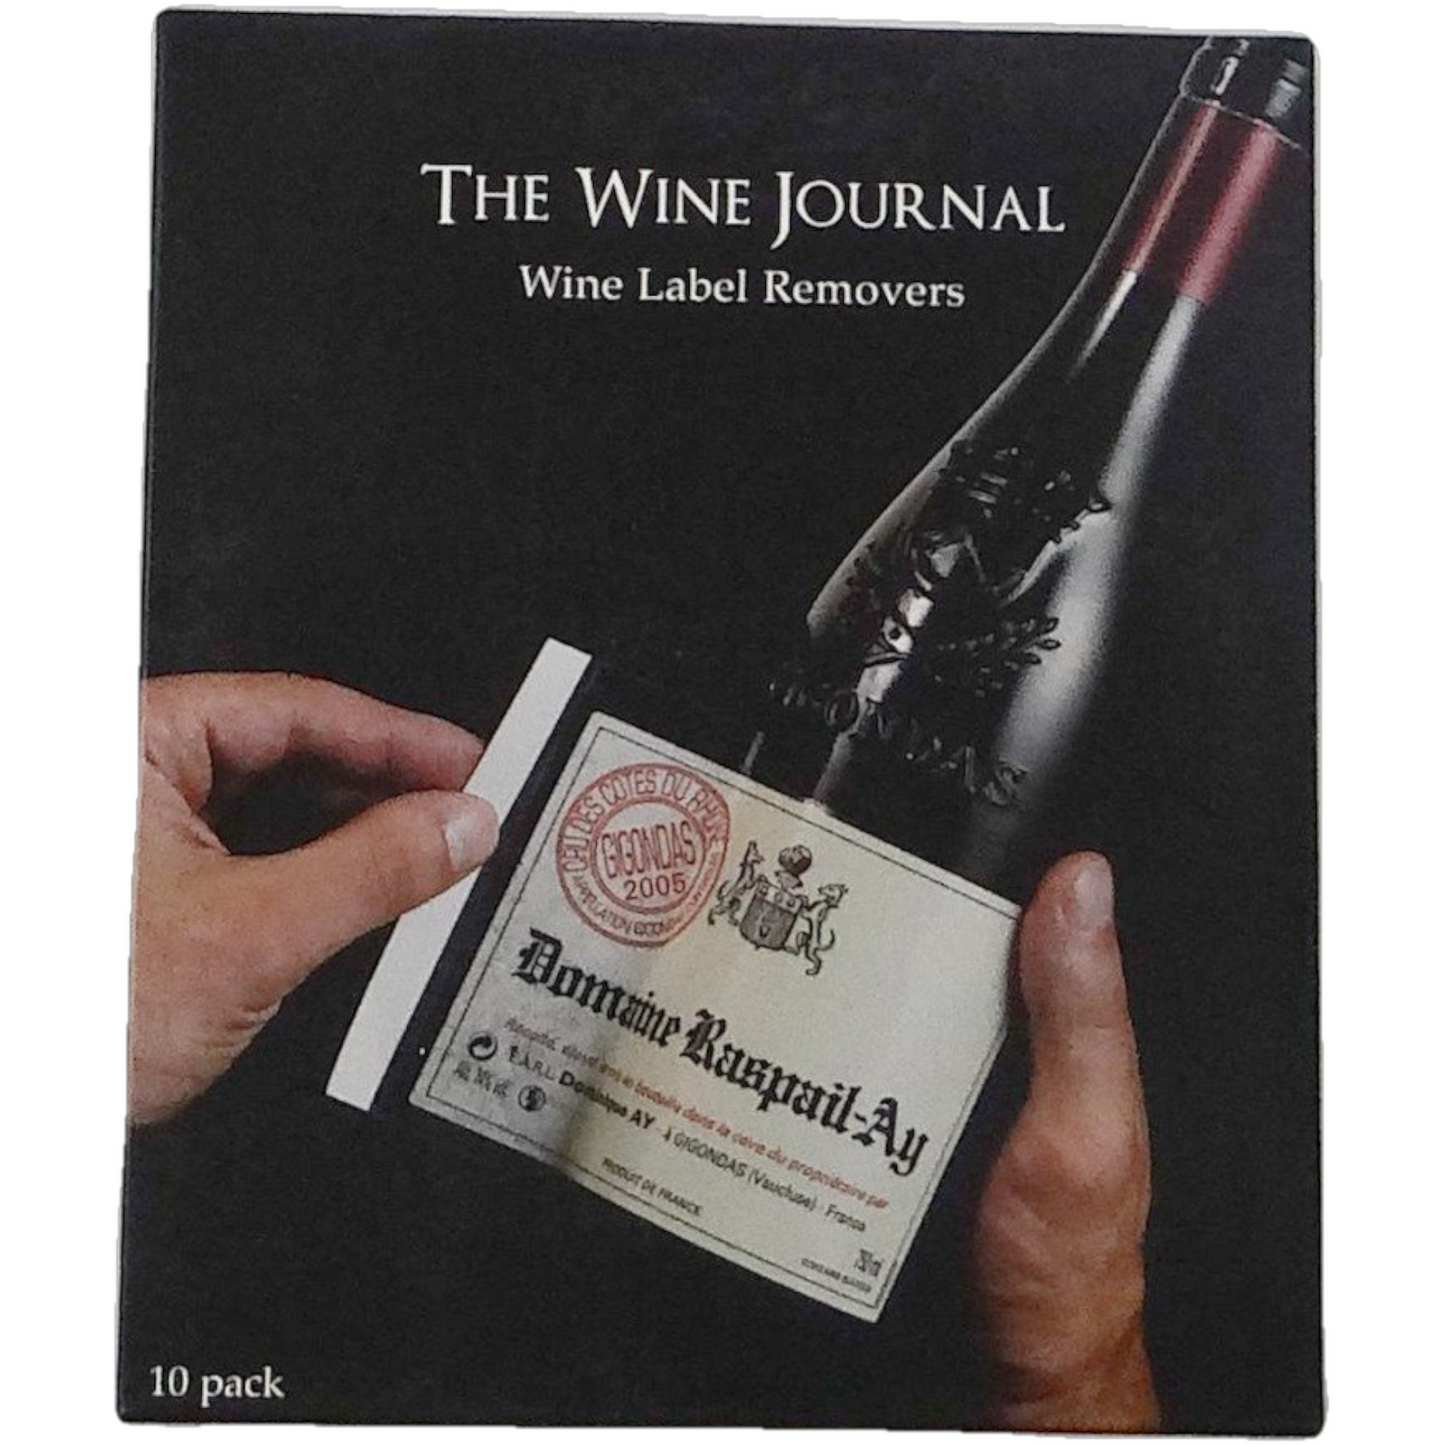 THE WINE JOURNAL LABEL REMOVERS